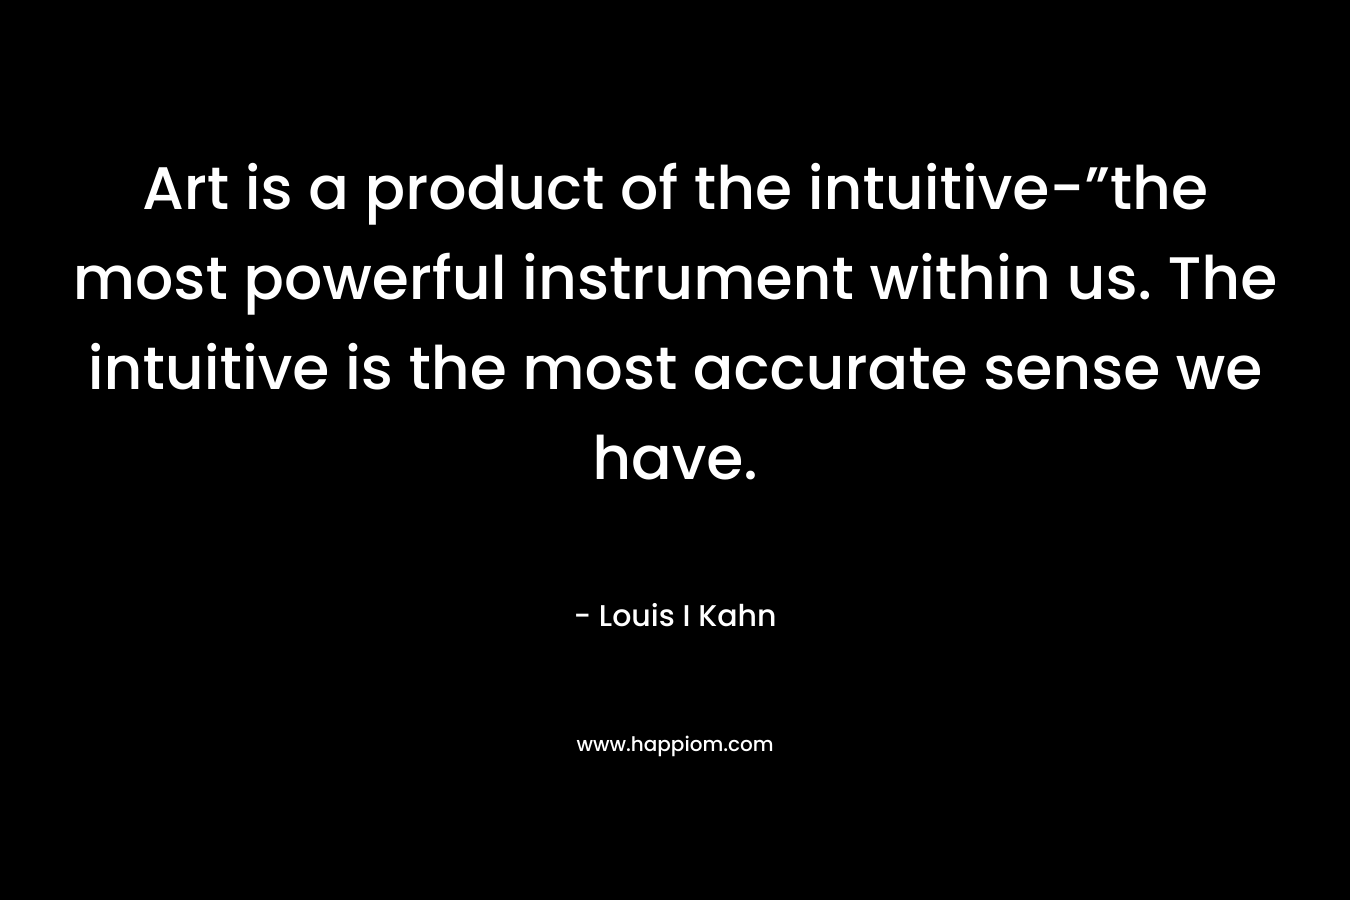 Art is a product of the intuitive-”the most powerful instrument within us. The intuitive is the most accurate sense we have.